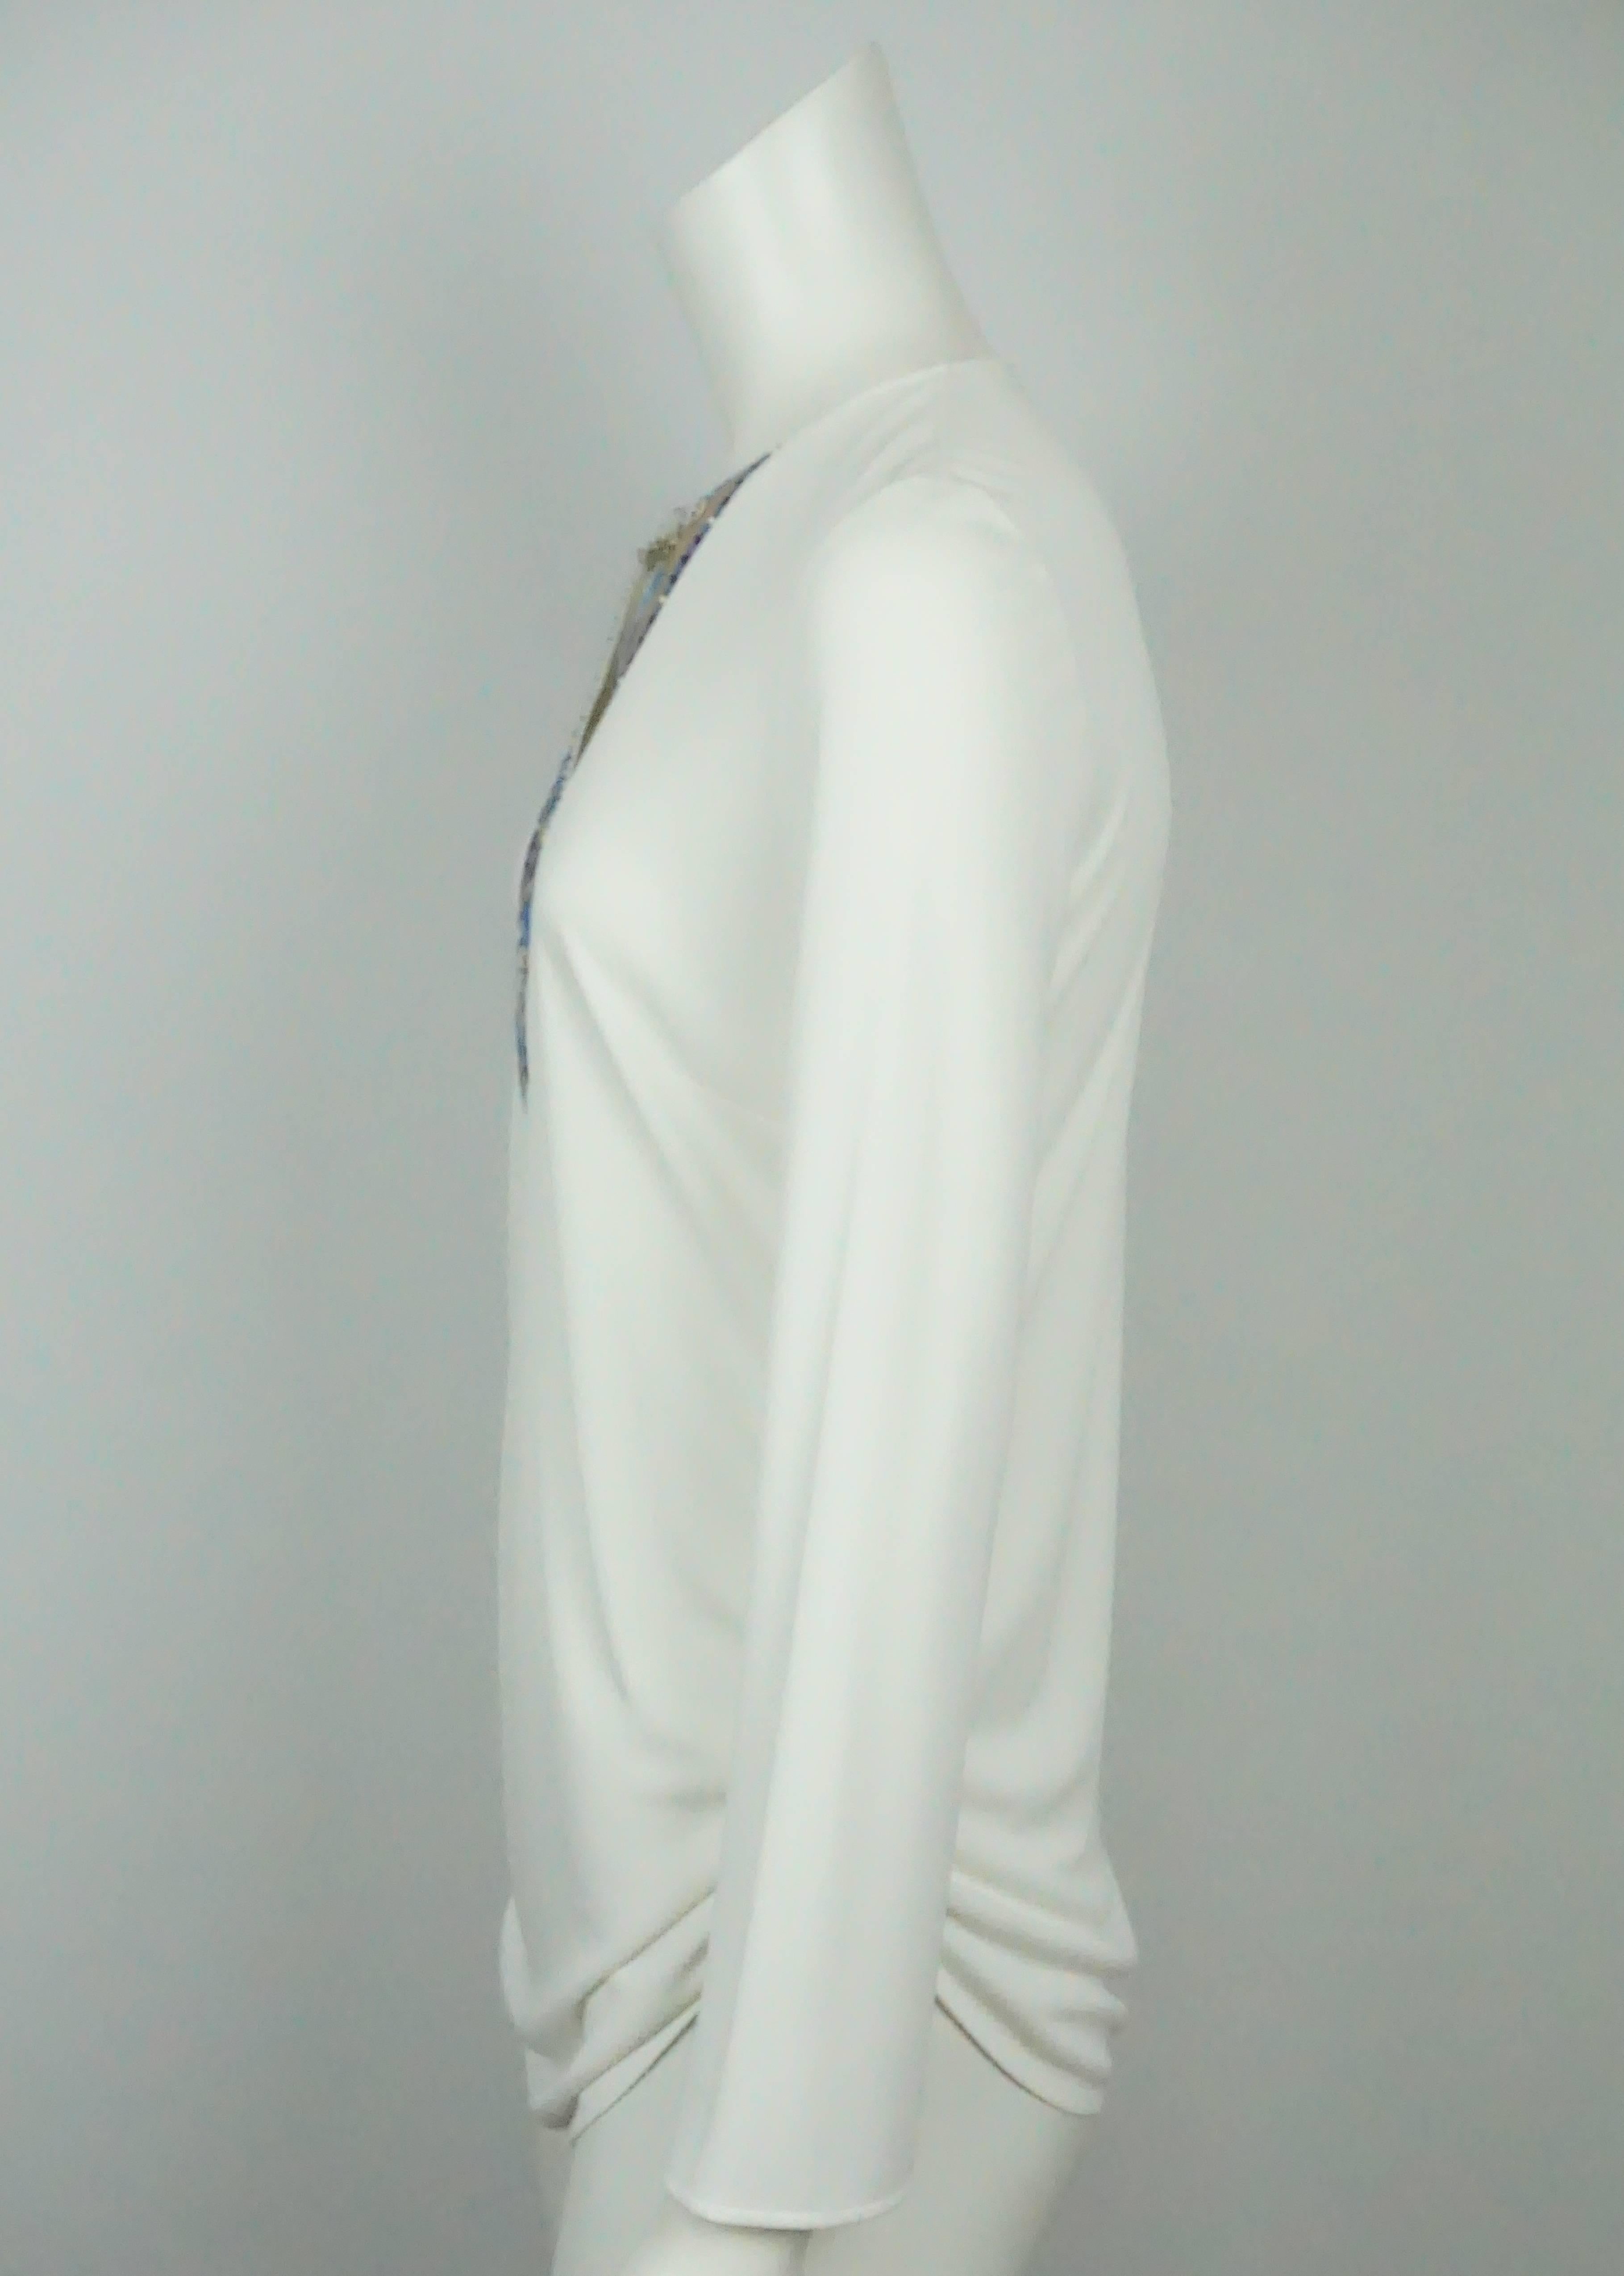 Emilio Pucci Ivory Silk L/S Top w/ Blue Print and Chain Detail - 40   This beautiful Pucci silk blend top is in excellent condition. This top has a deep v neck that is detailed with a blue, yellow, taupe, and turquoise print. Near the neckline there